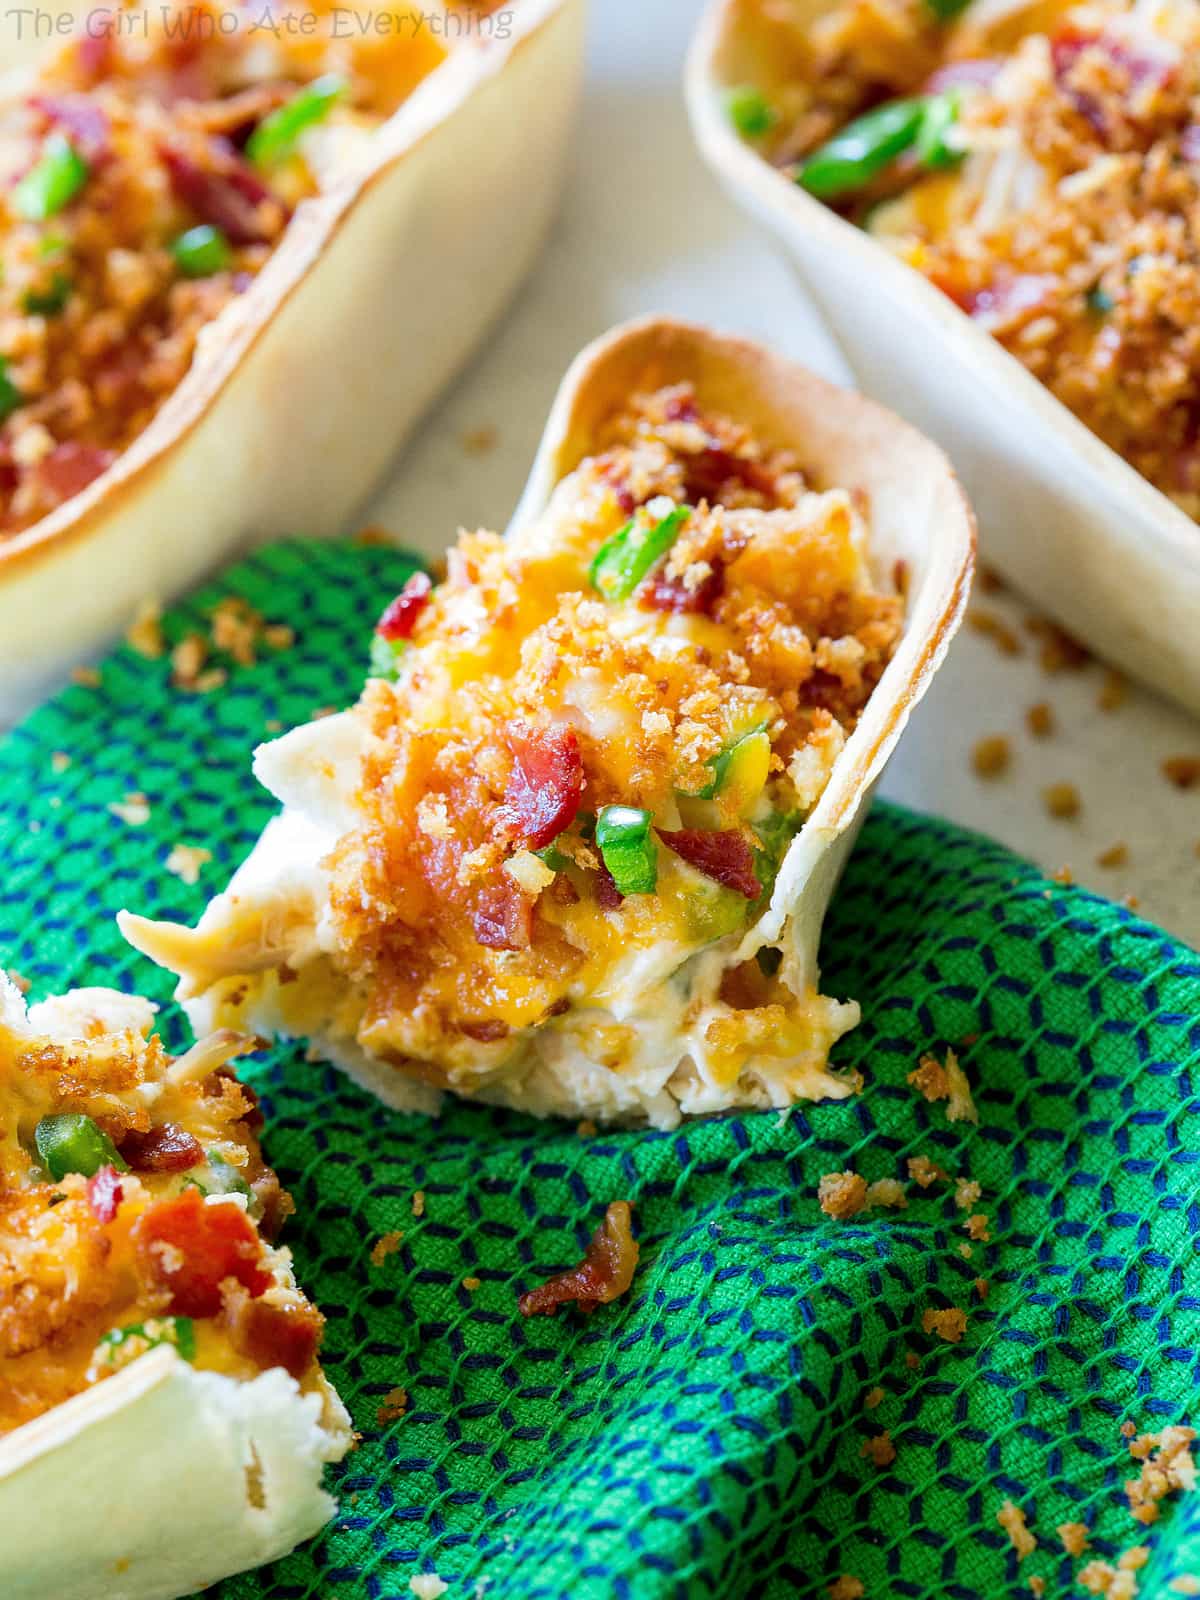 Jalapeno Popper Chicken Tacos - so good! Creamy, a little spicy, and with crunchy Panko topping on top! the-girl-who-ate-everything.com